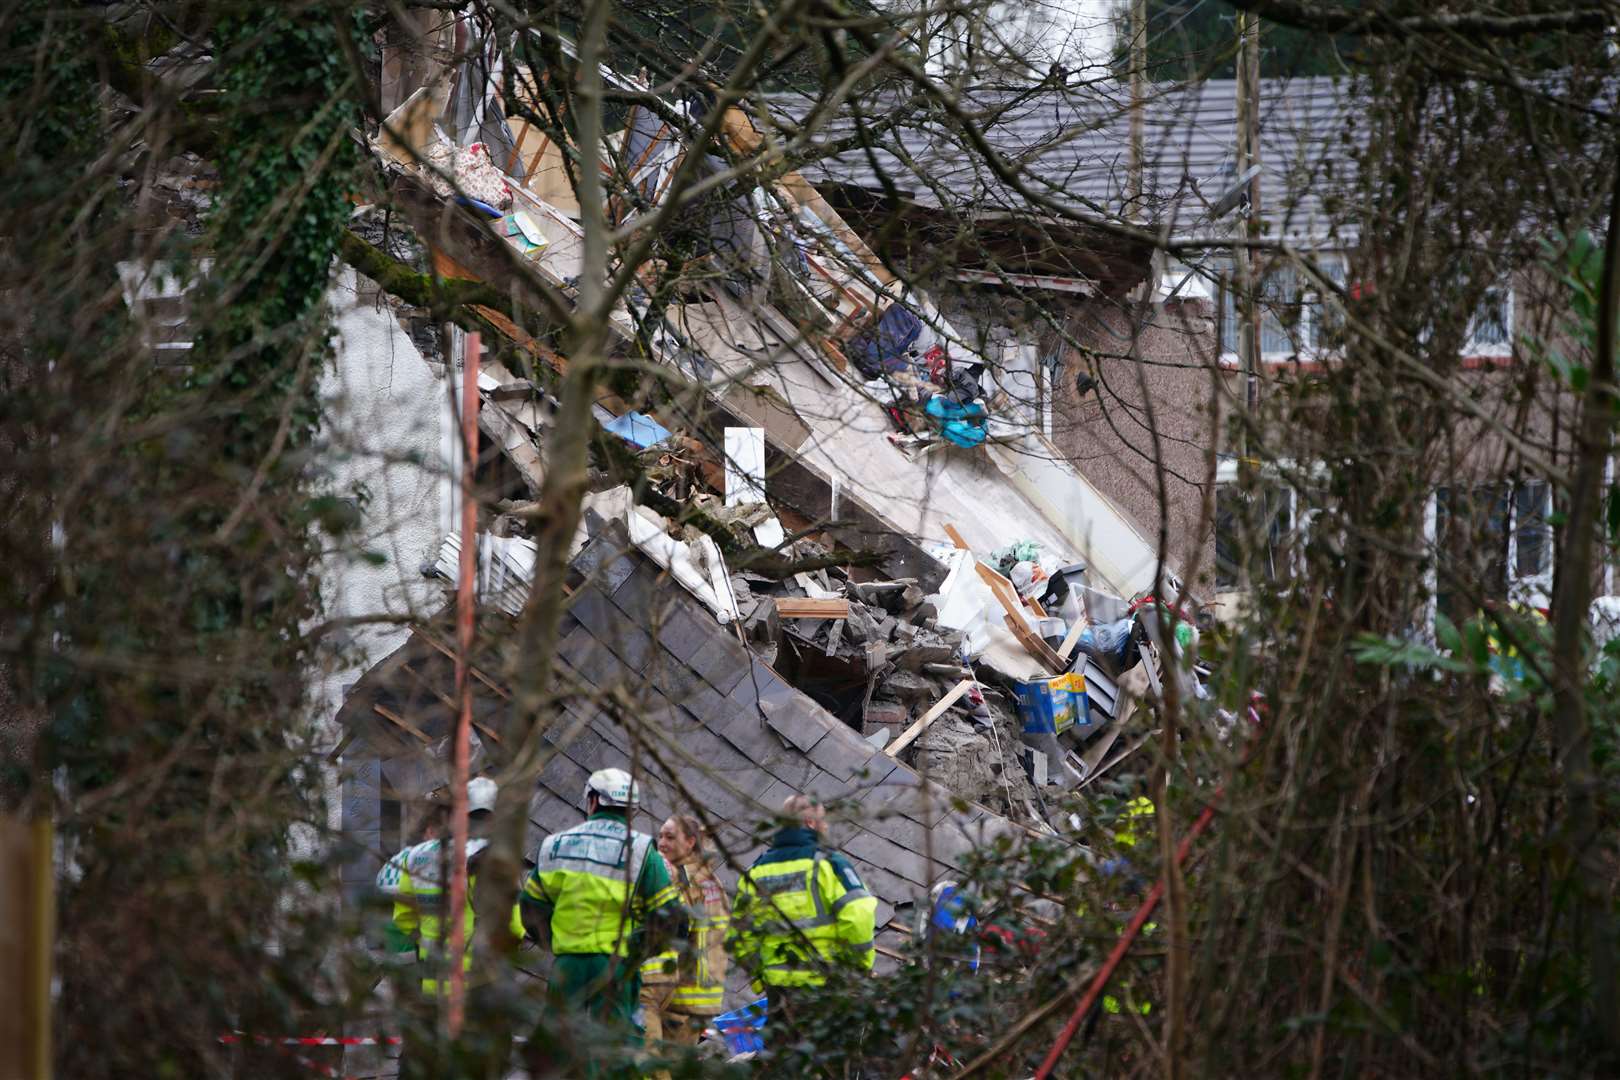 Three people have been taken to hospital while one person remains unaccounted for (Ben Birchall/PA)